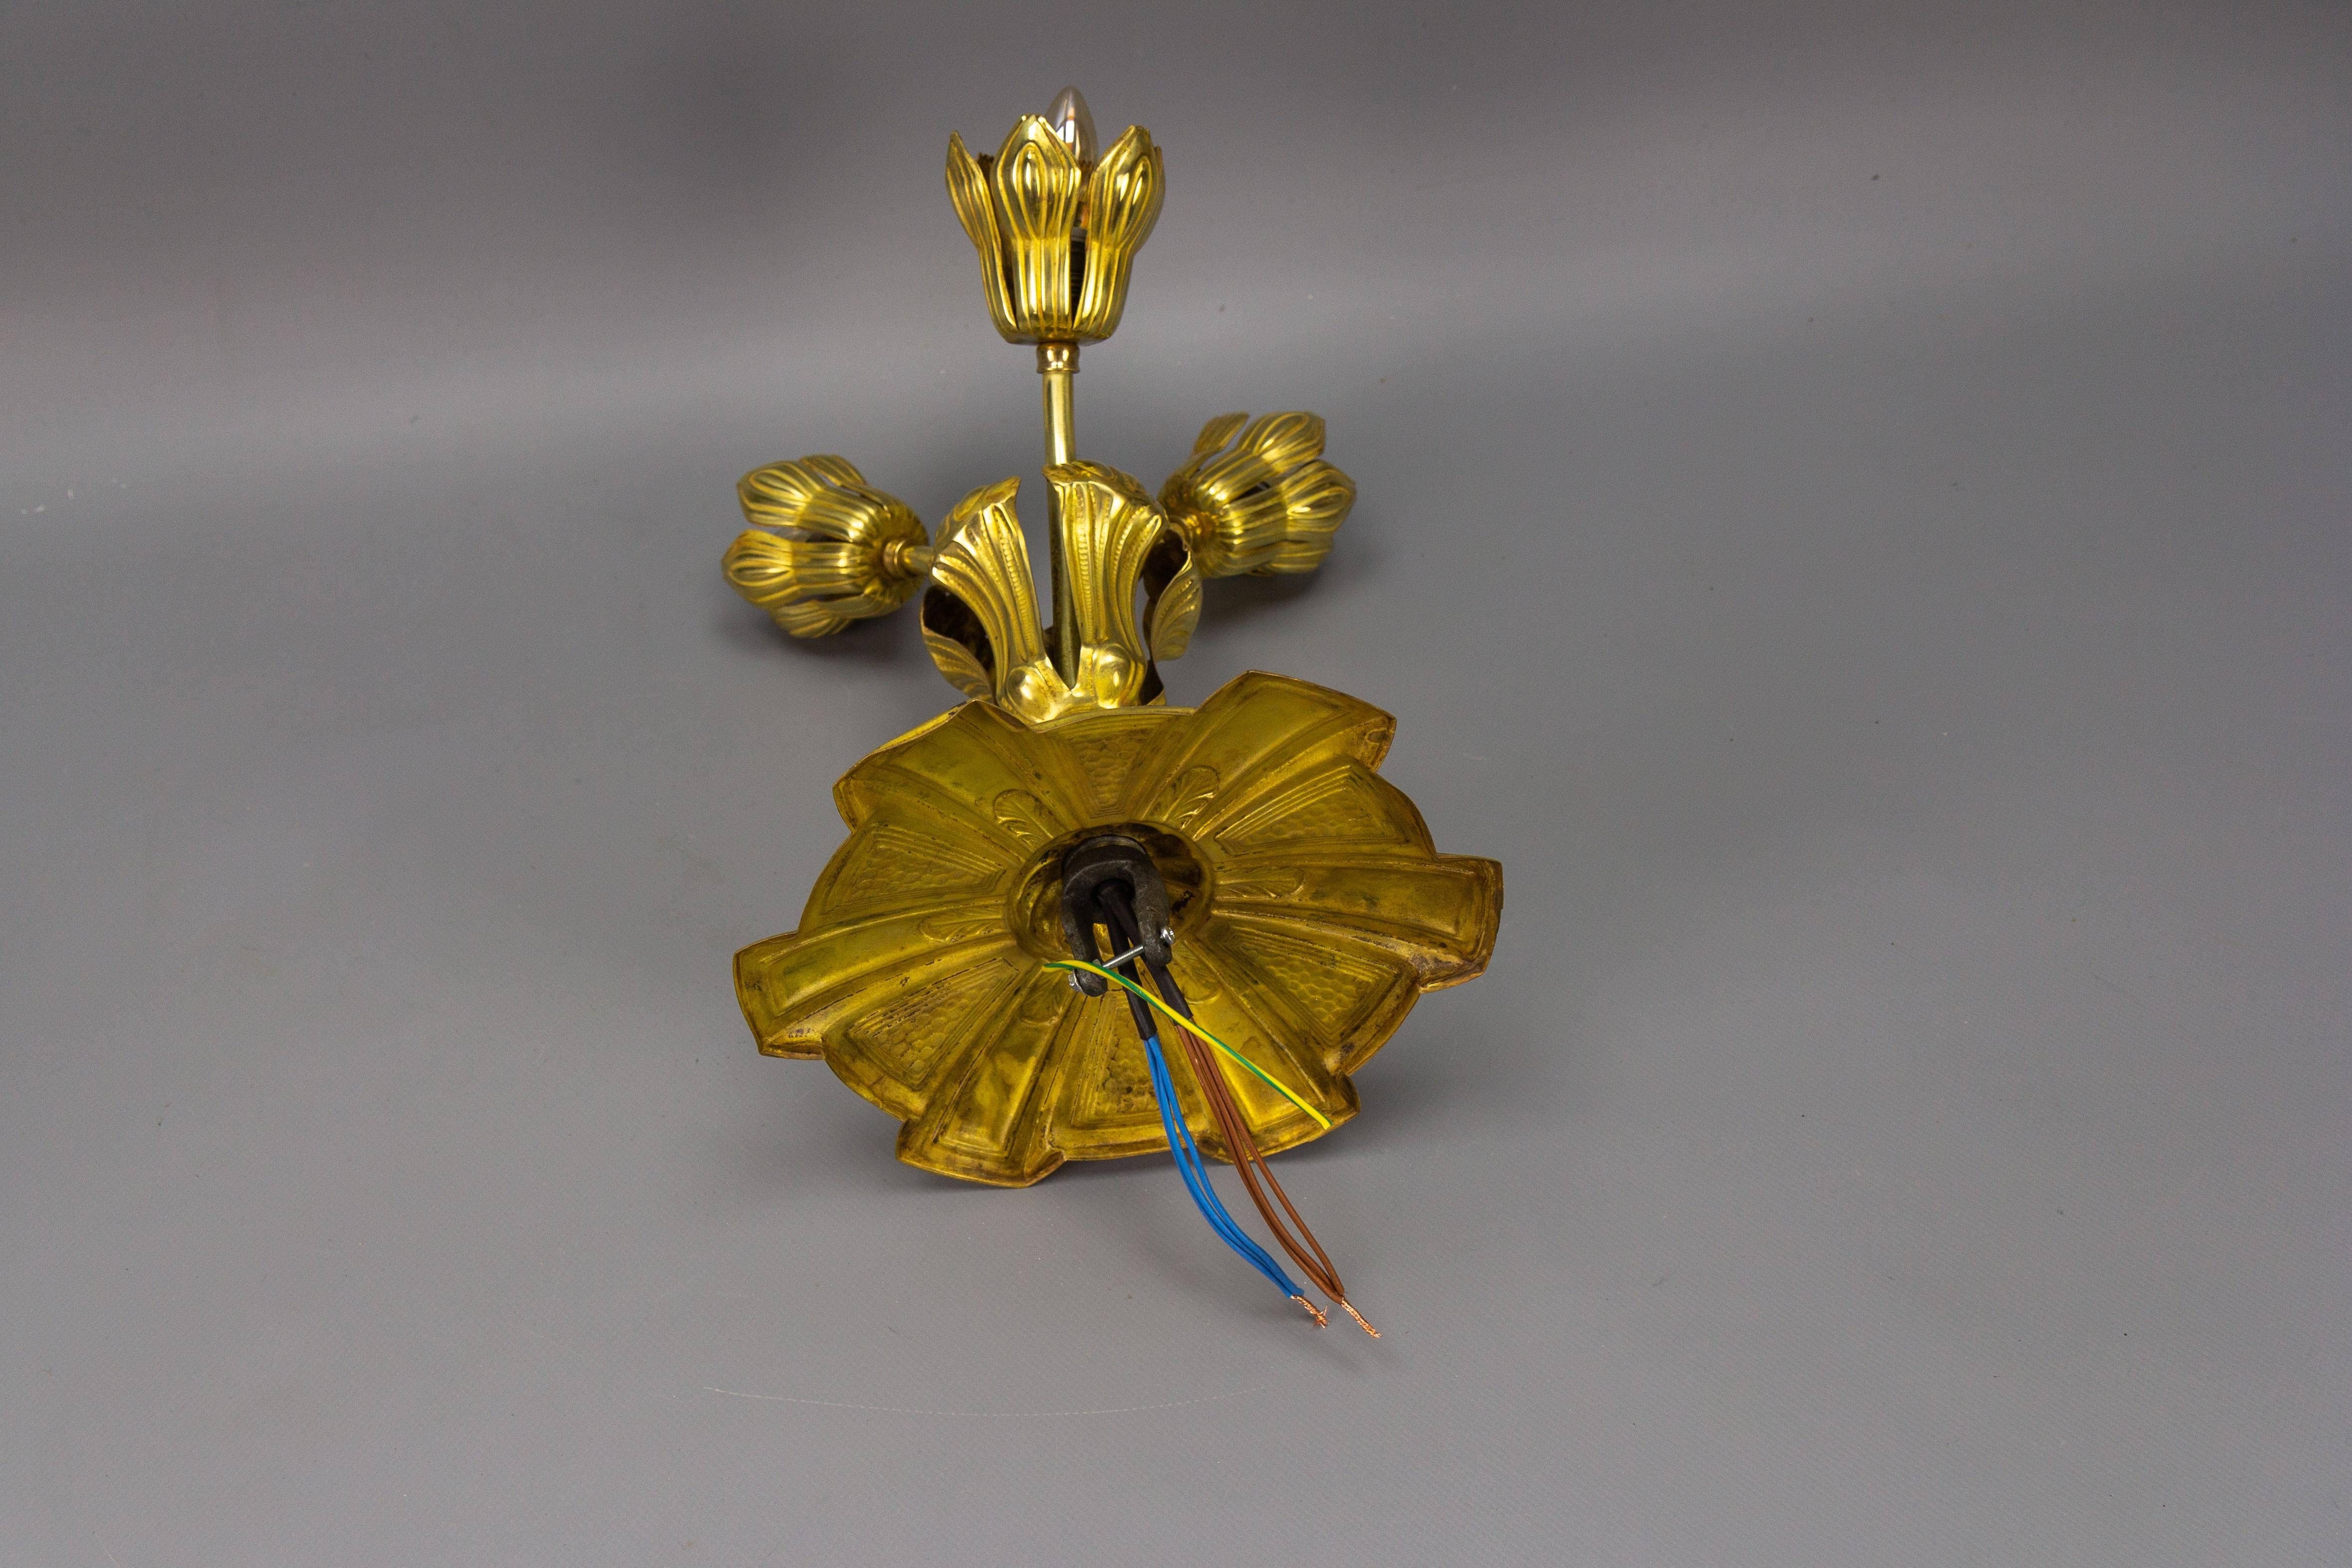  French Art Deco Three-Light Brass Ceiling Light Fixture, 1920s For Sale 11